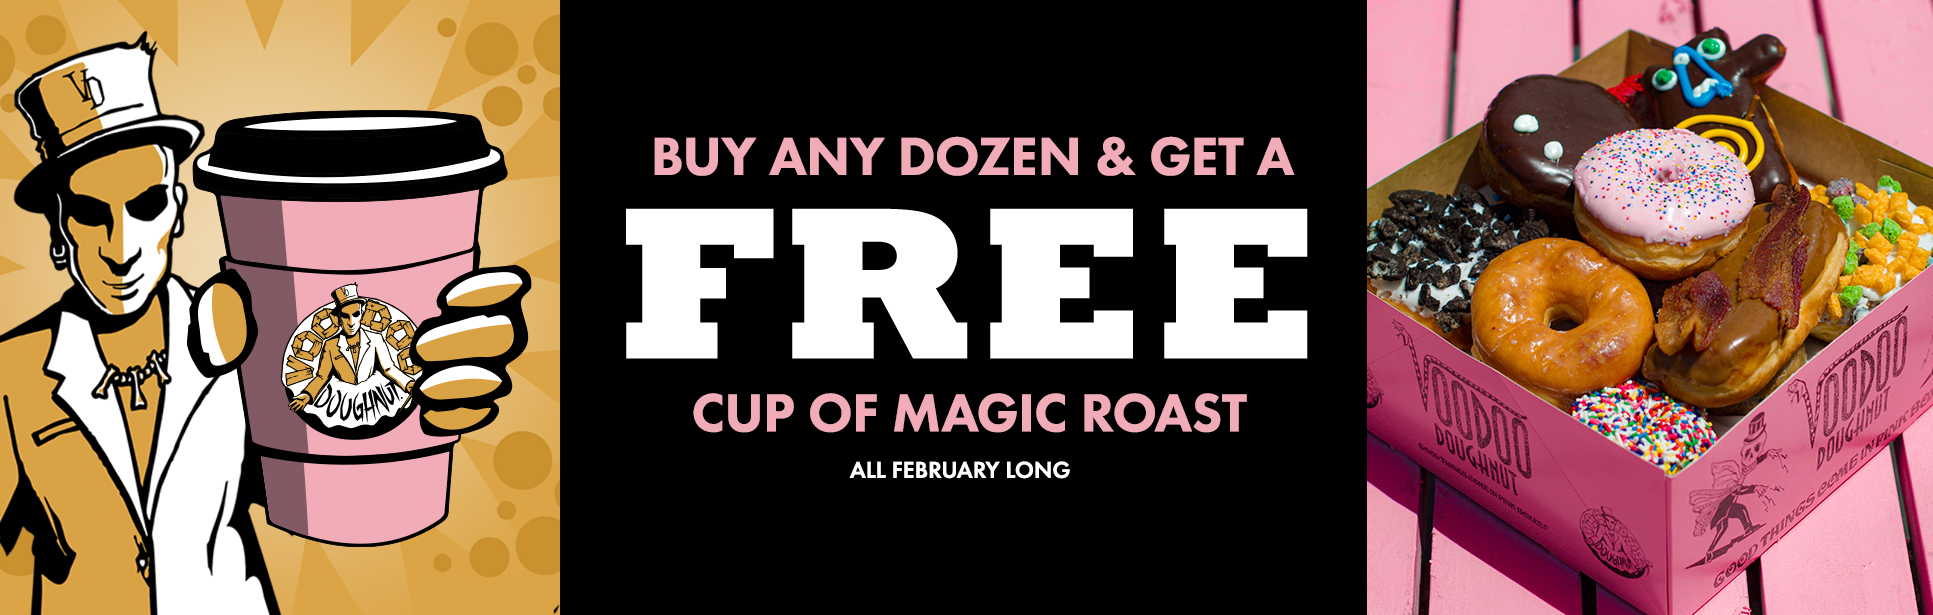 text shows a promo with buy any dozen and get a free cup of magic roast (coffee). graphics show the Voodoo Doughnut baron holding a pink cup of Magic roast and a picture of a Voodoo Dozen doughnuts.